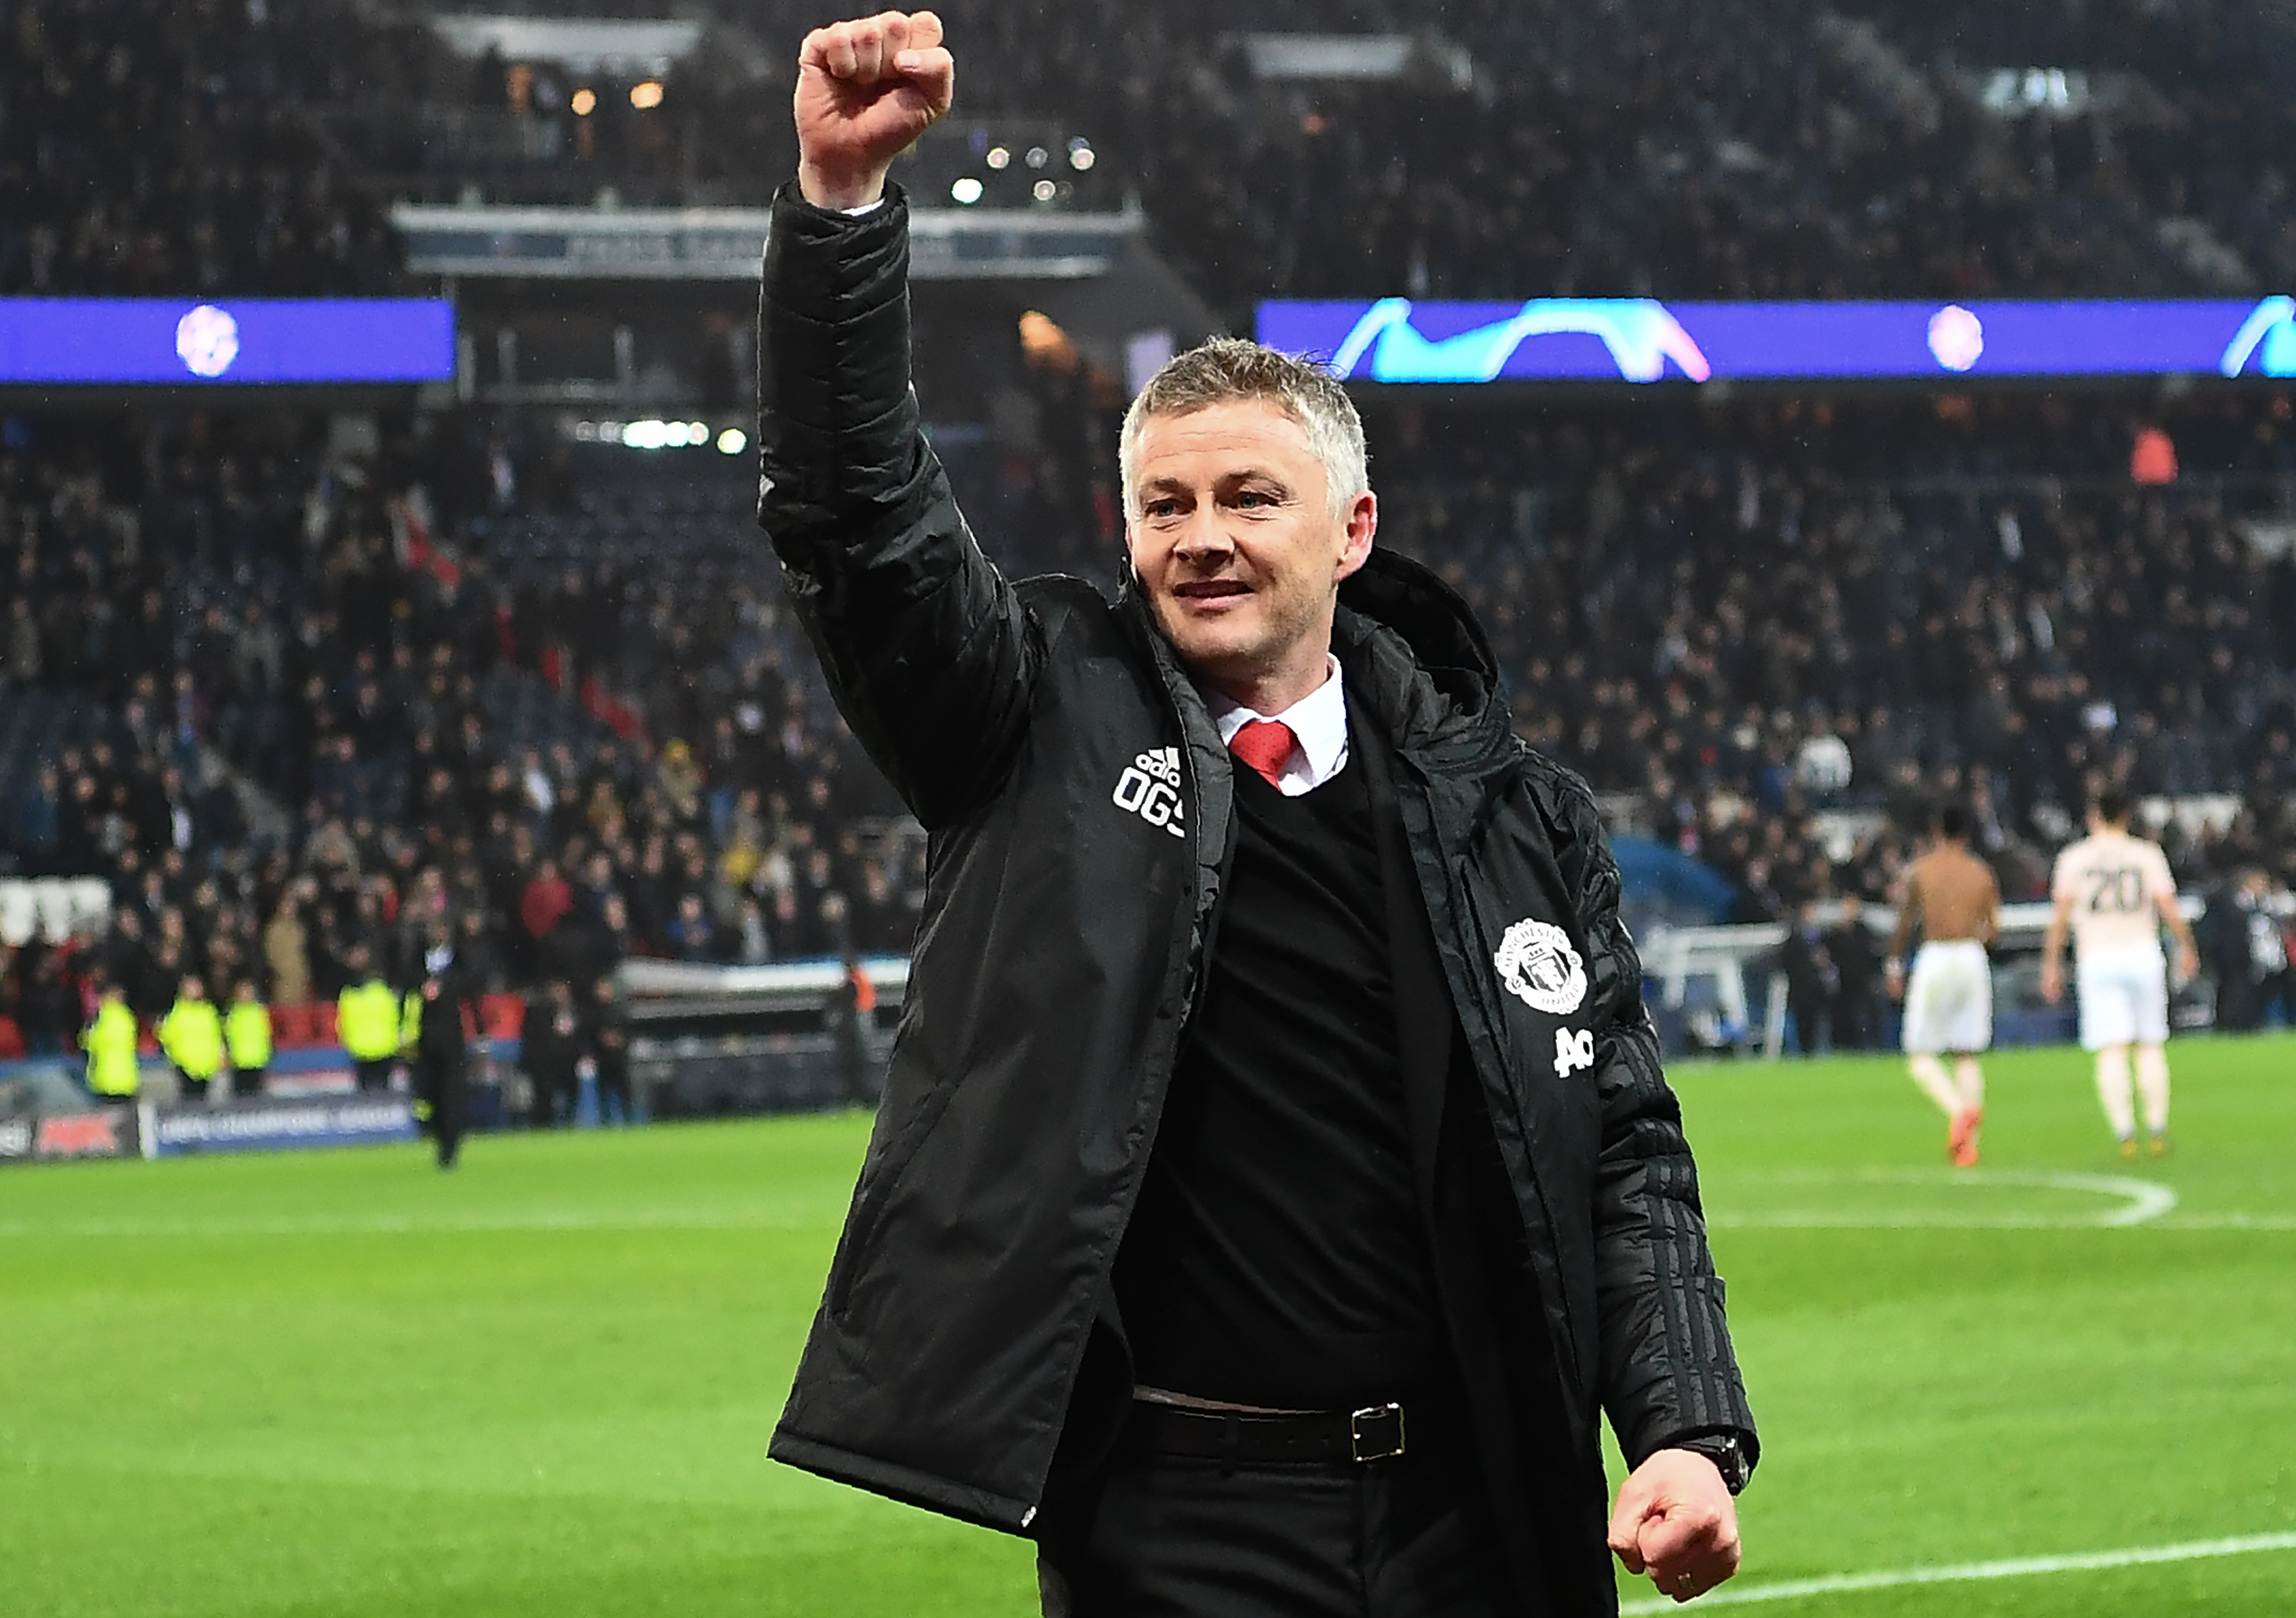 Solskjaer is set to become permanent Manchester United manager. (Photo by Anne-Christine Poujoulat/AFP/Getty Images)